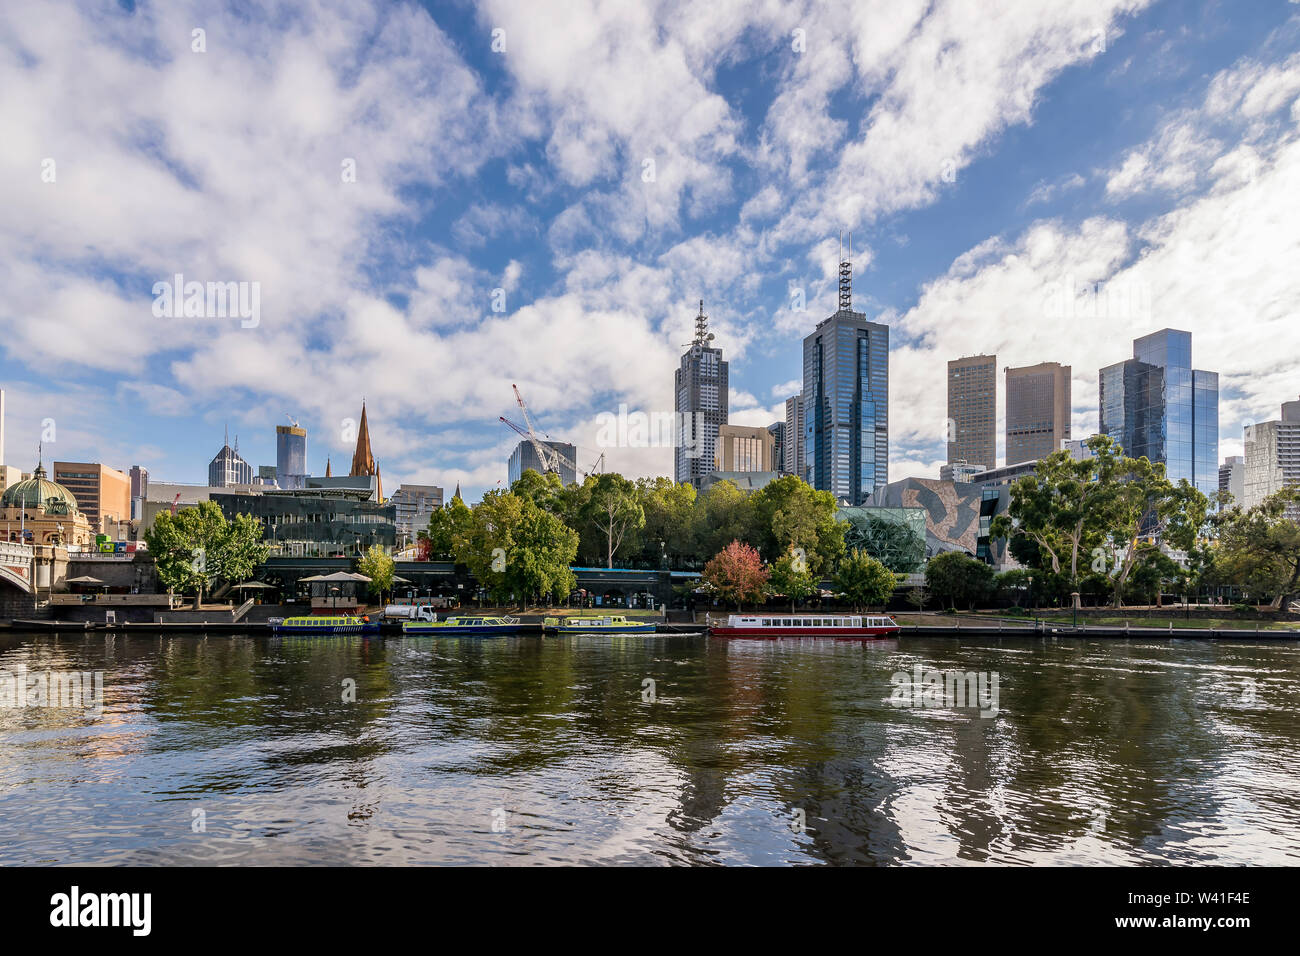 Beautiful view of the Yarra River with the reflection of the skyscrapers of the central business district of Melbourne, Australia Stock Photo